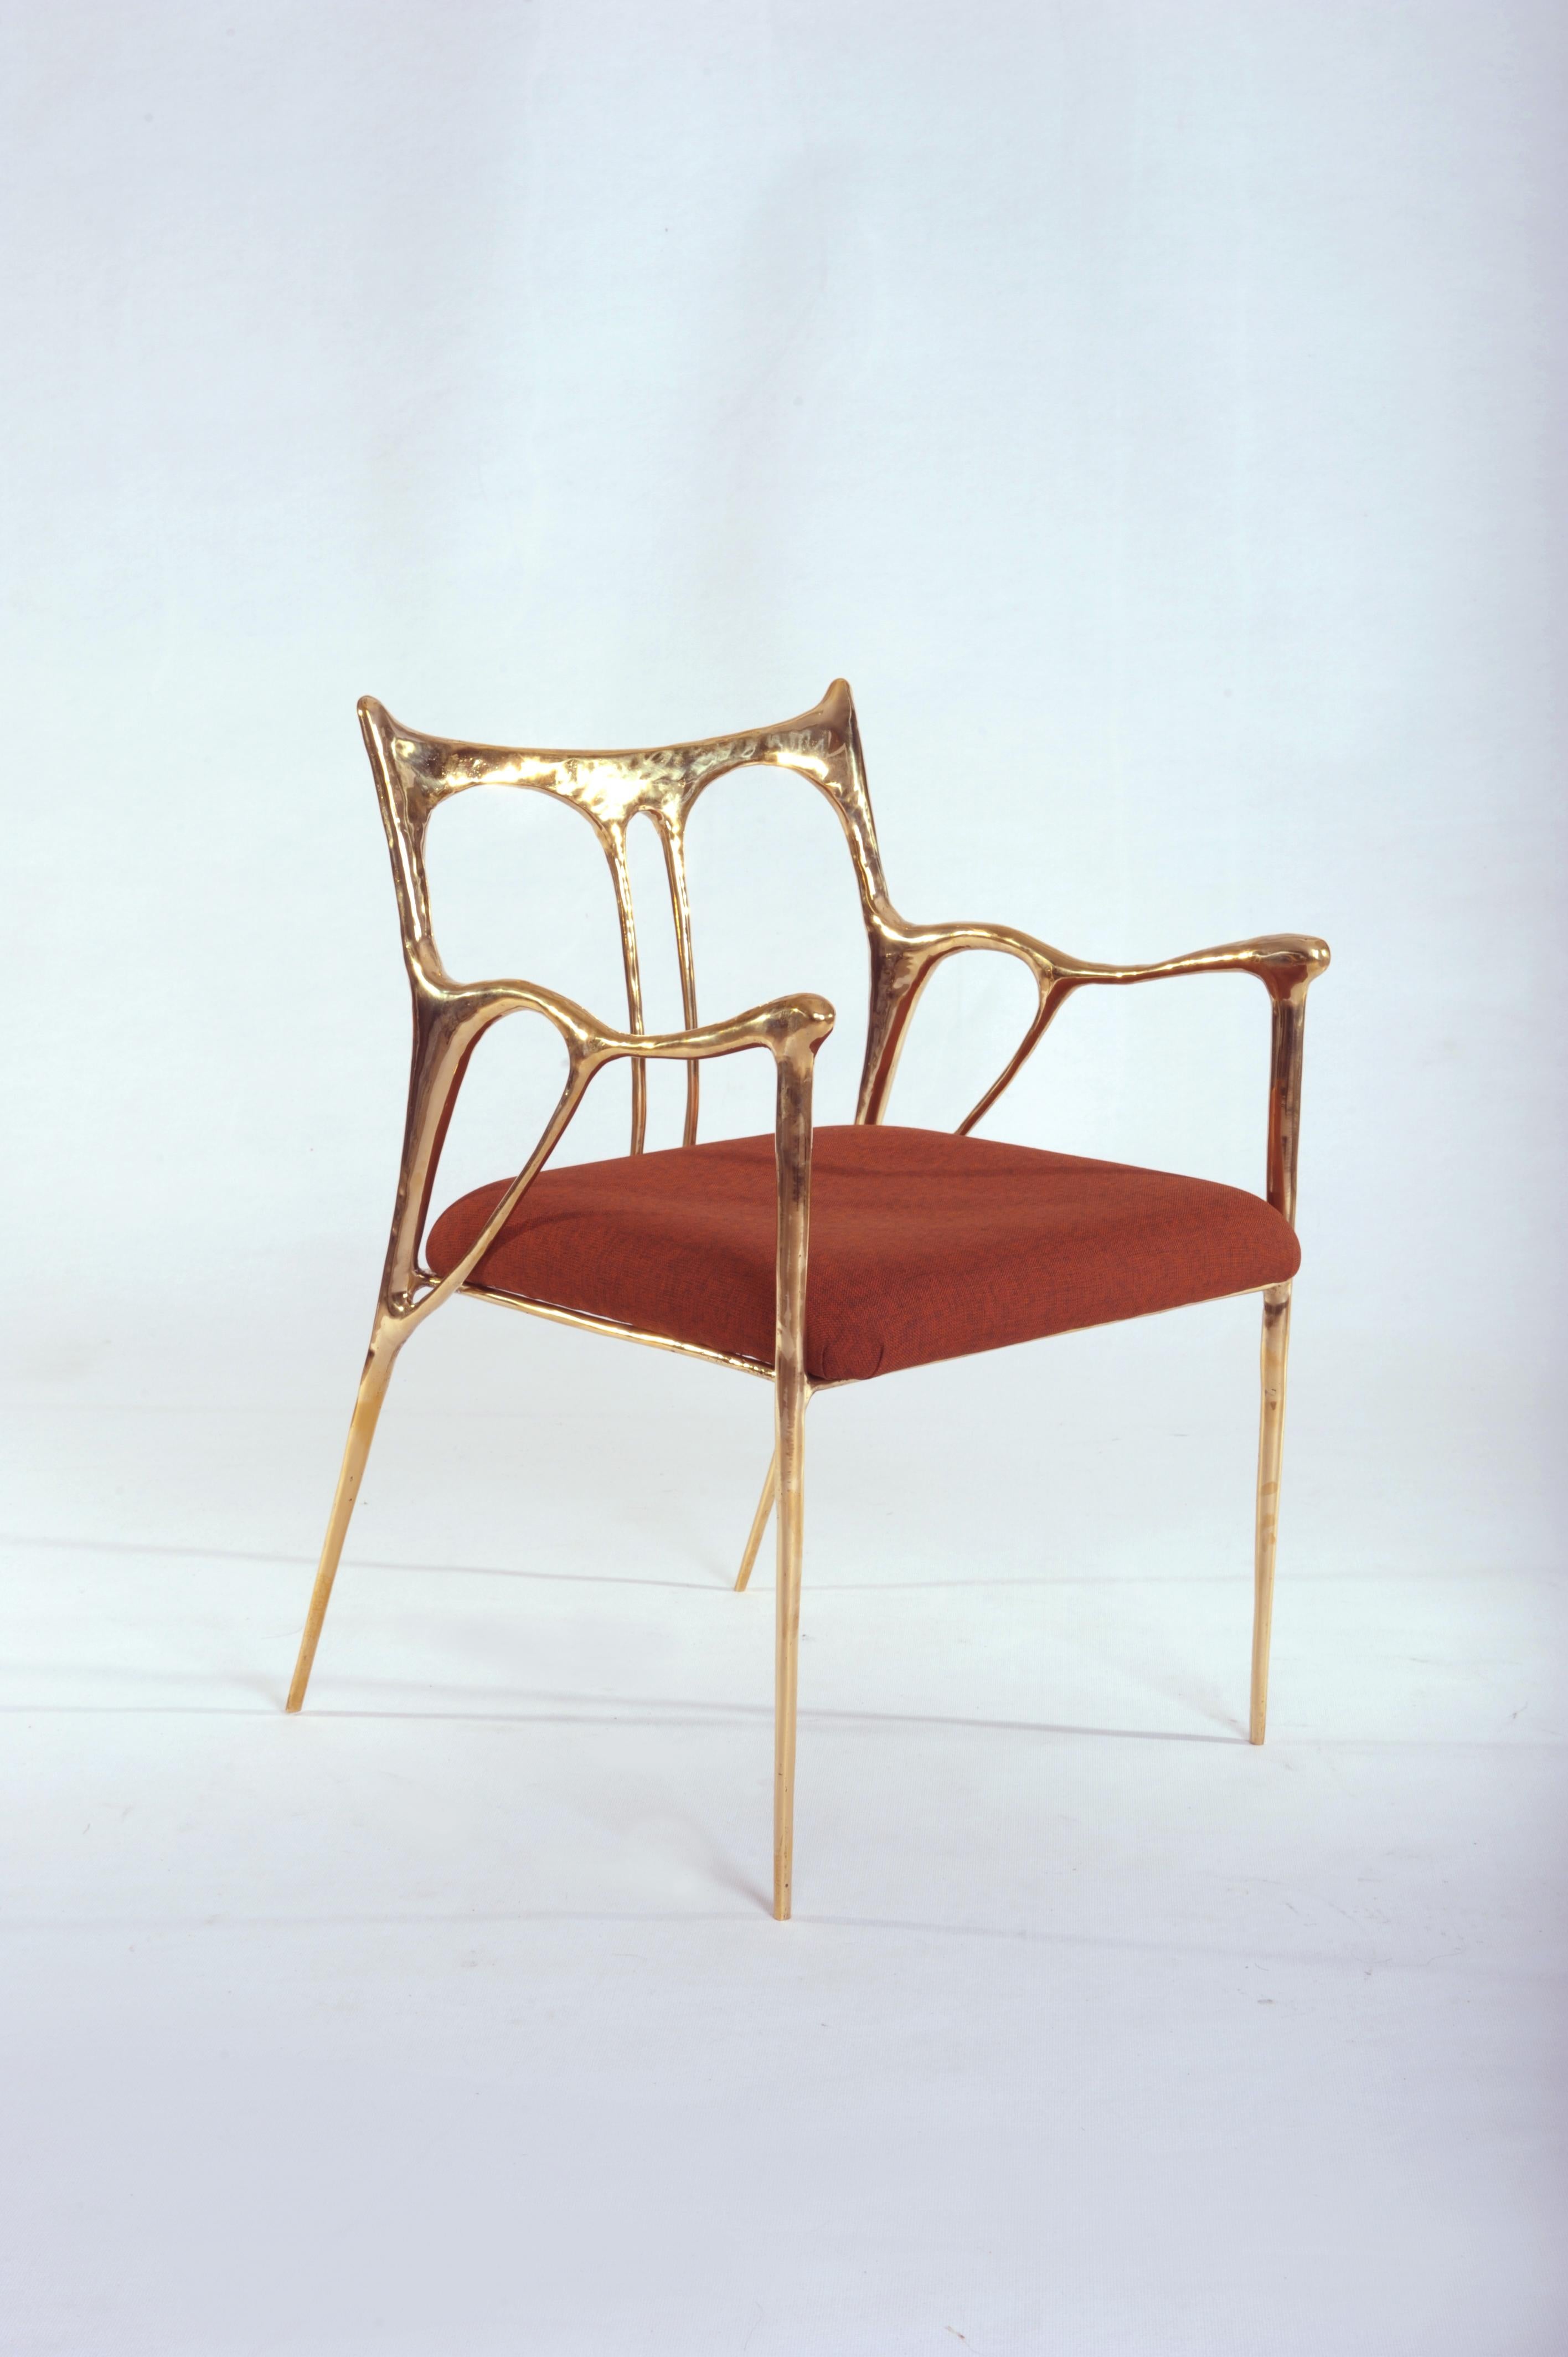 Pair of sculpted brass chairs - Misaya
Dimensions: W 54 x L 58 x H 79 cm (seating: 63)
Hand-sculpted chairs.
 